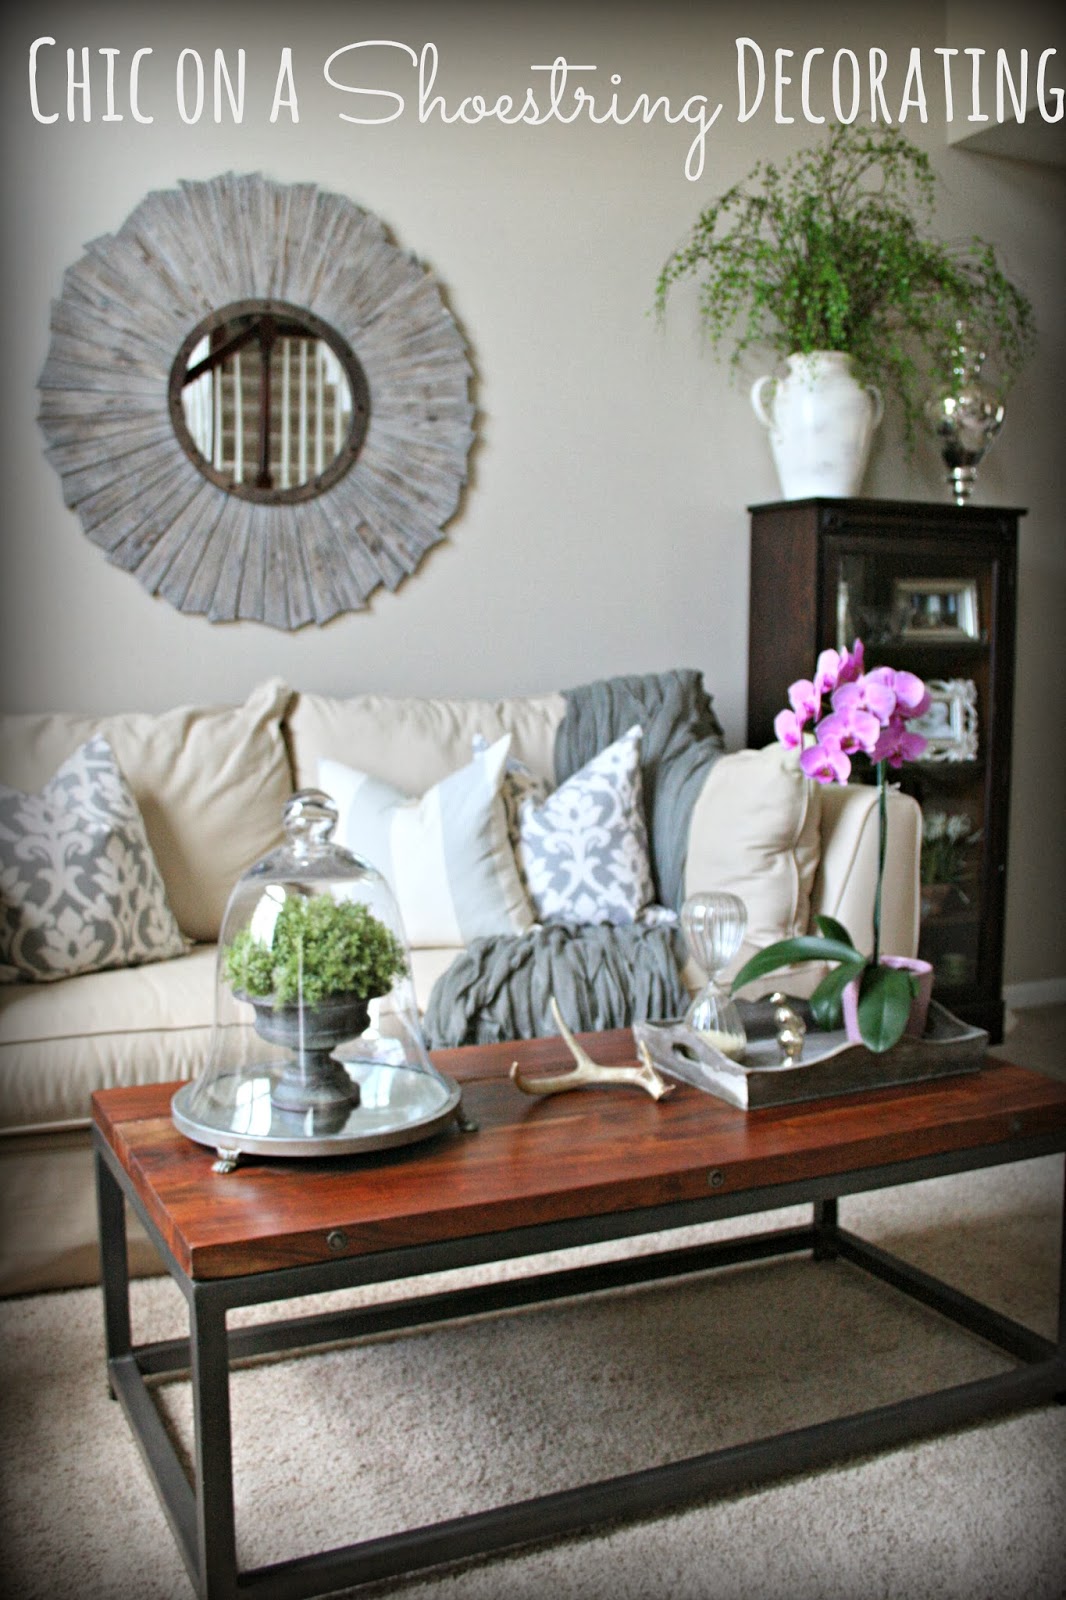 How To Achieve Luxury Interior Decor On A Shoestring Budget